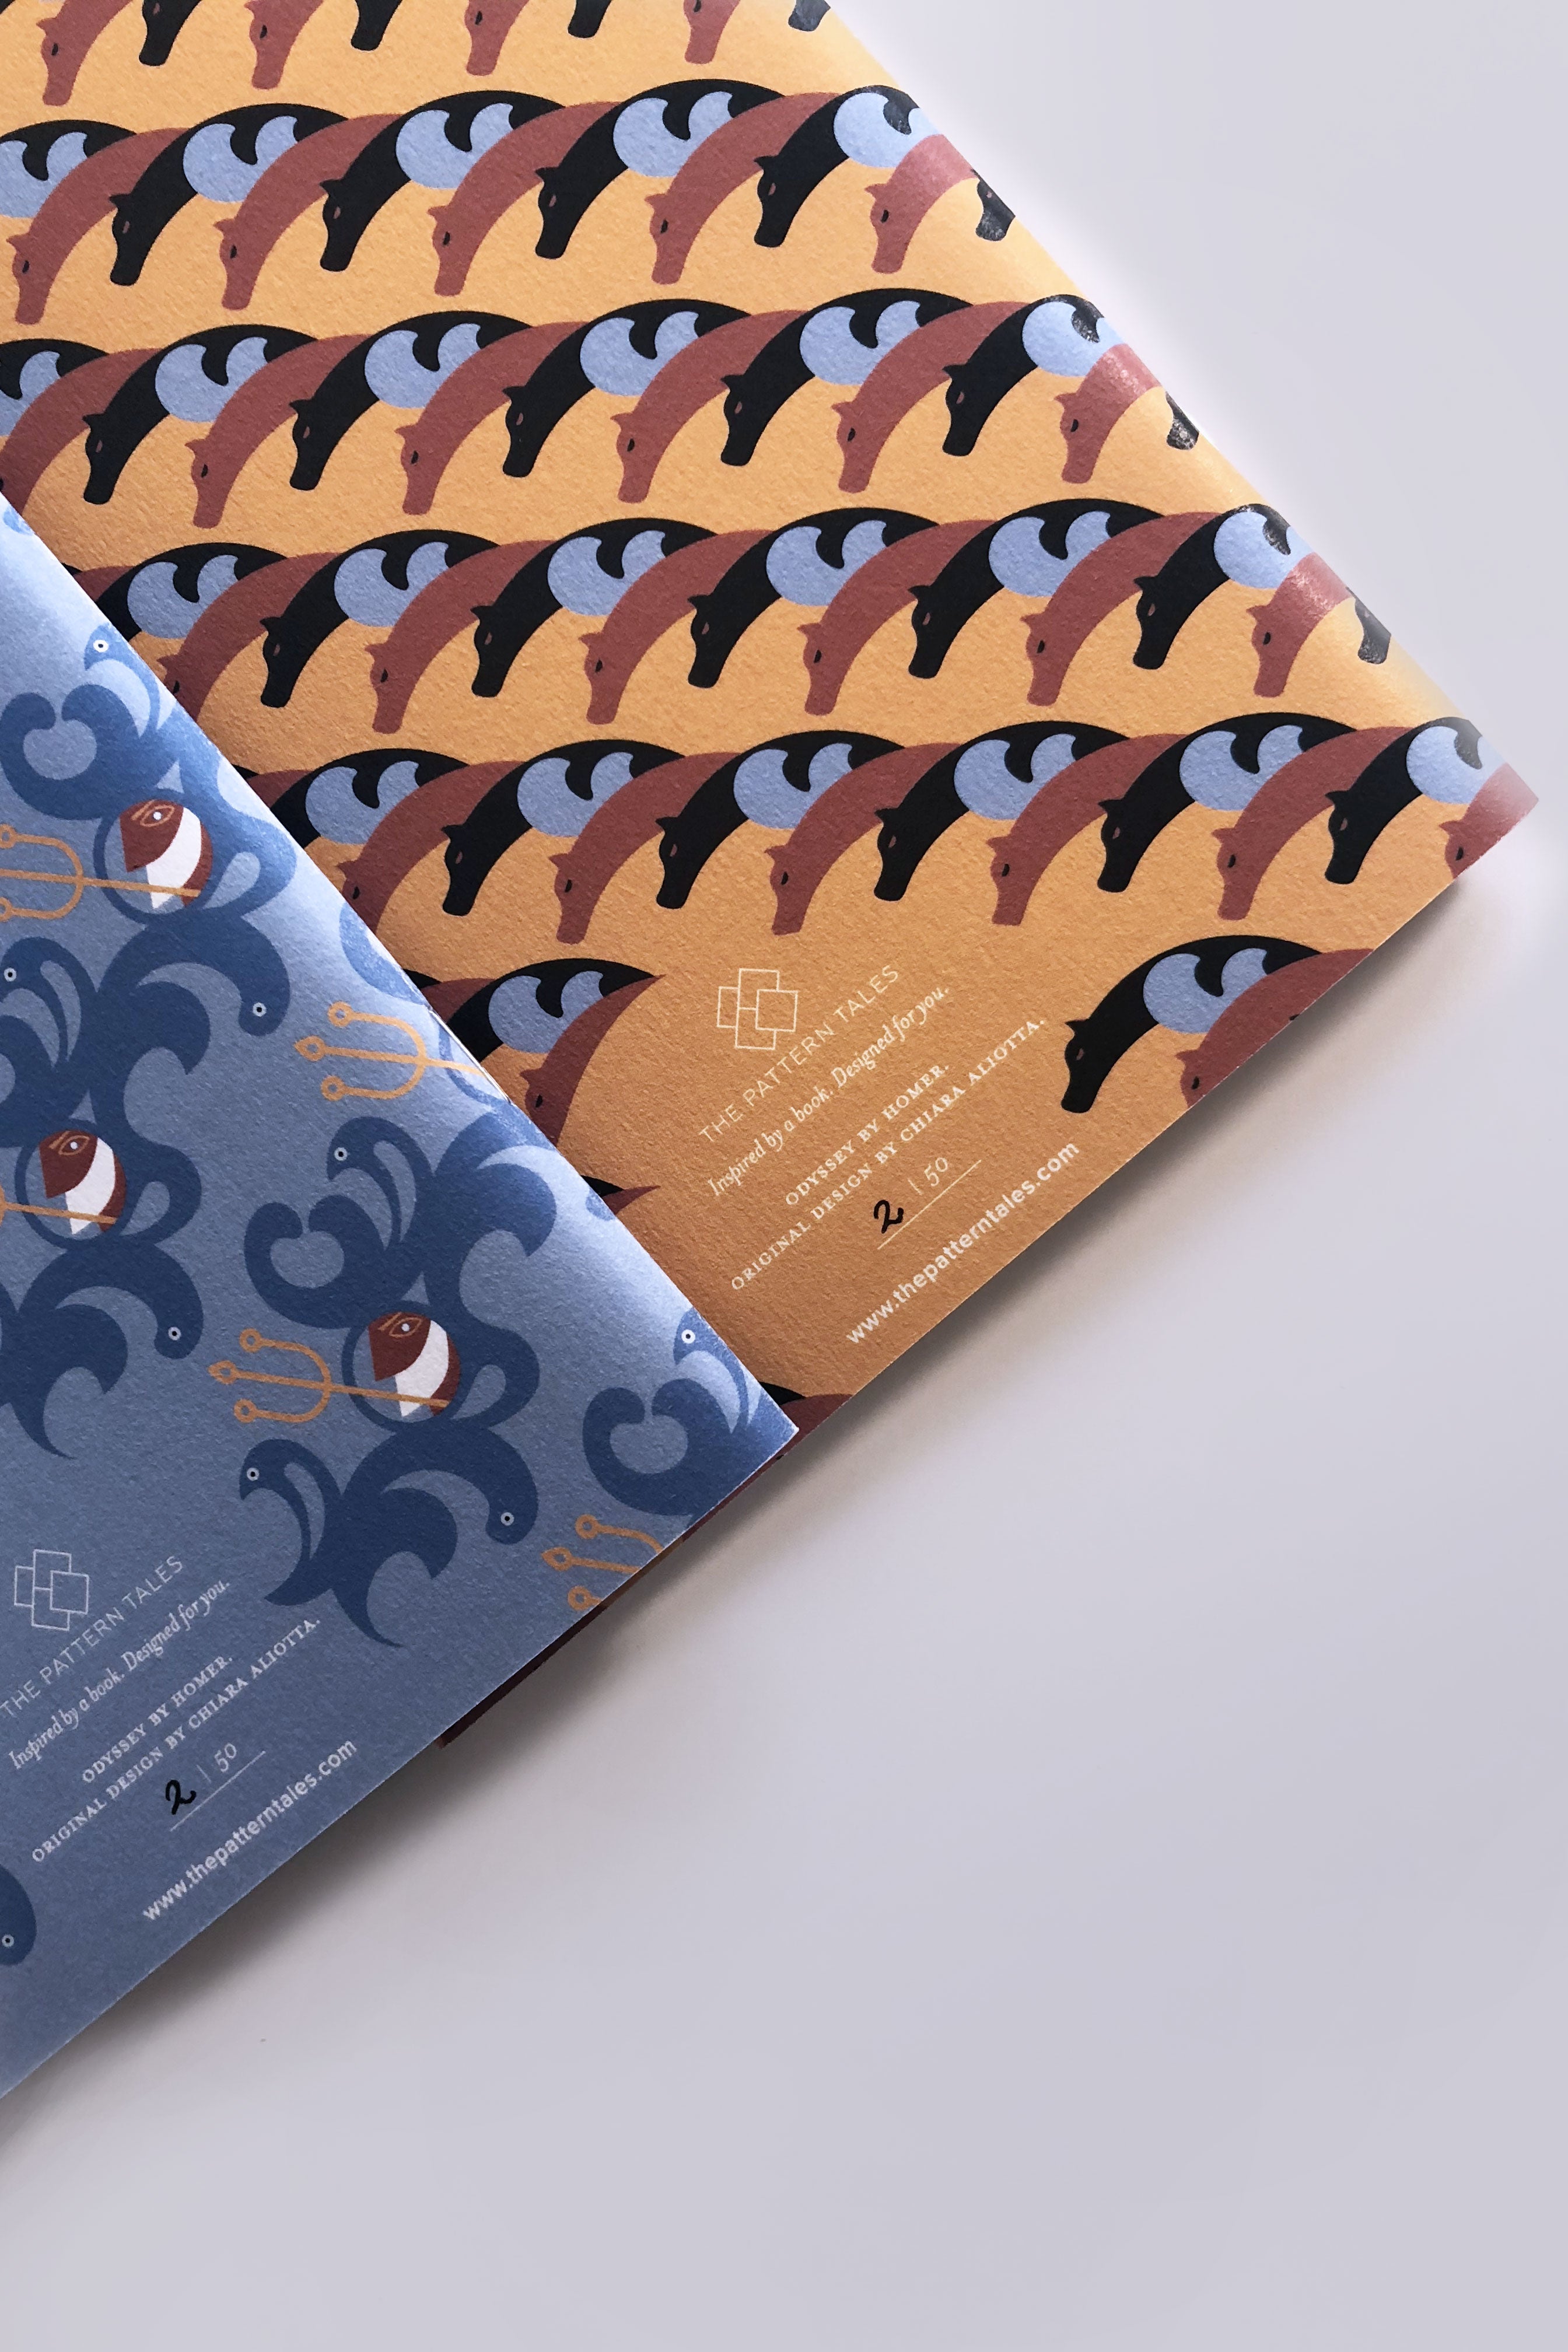 Limited edition notebooks inspired by Odyssey